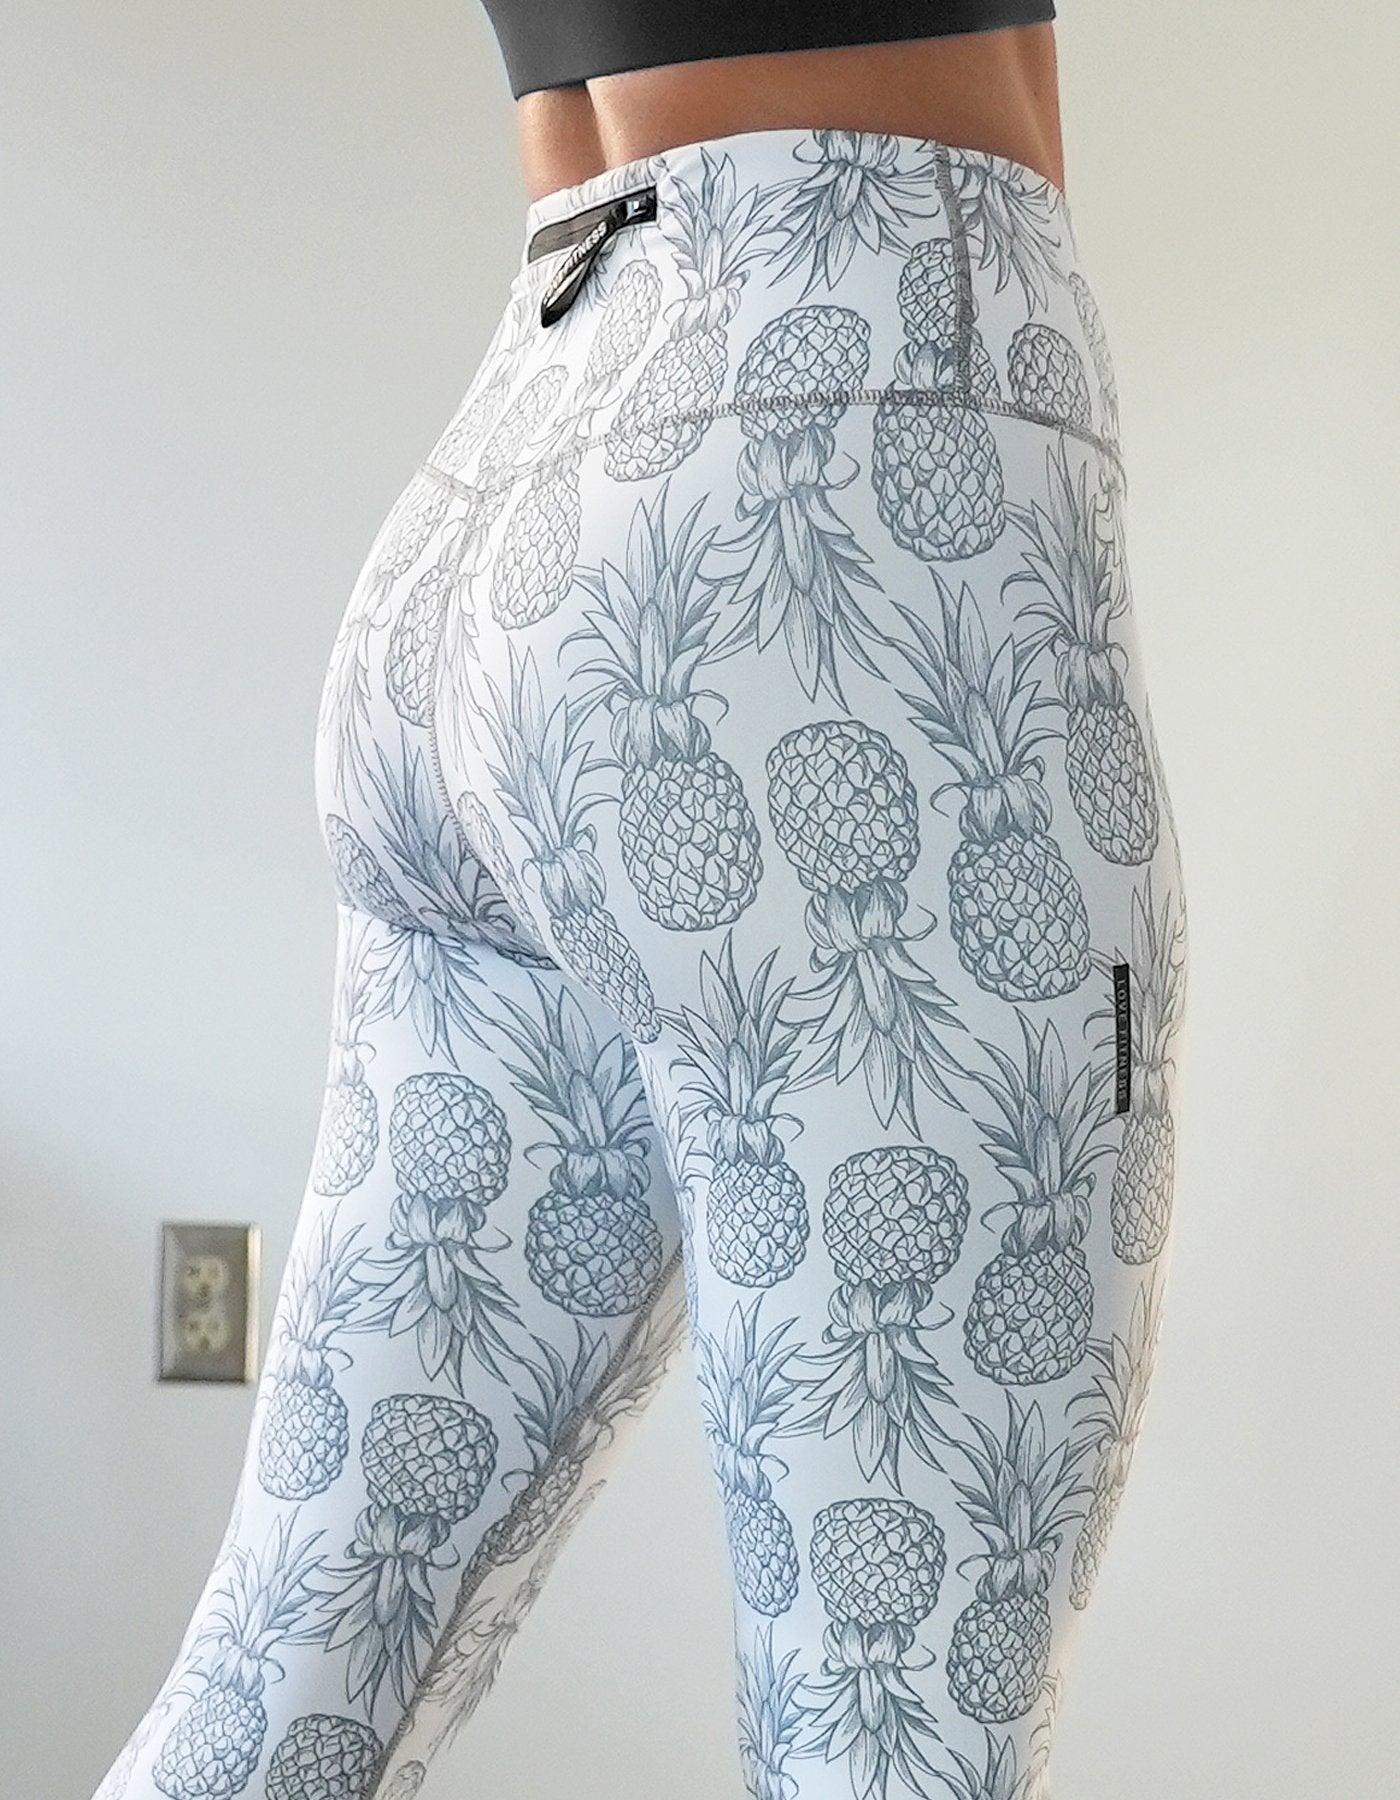 Buy Charcoal High Waist Leggings from the Pineapple online store